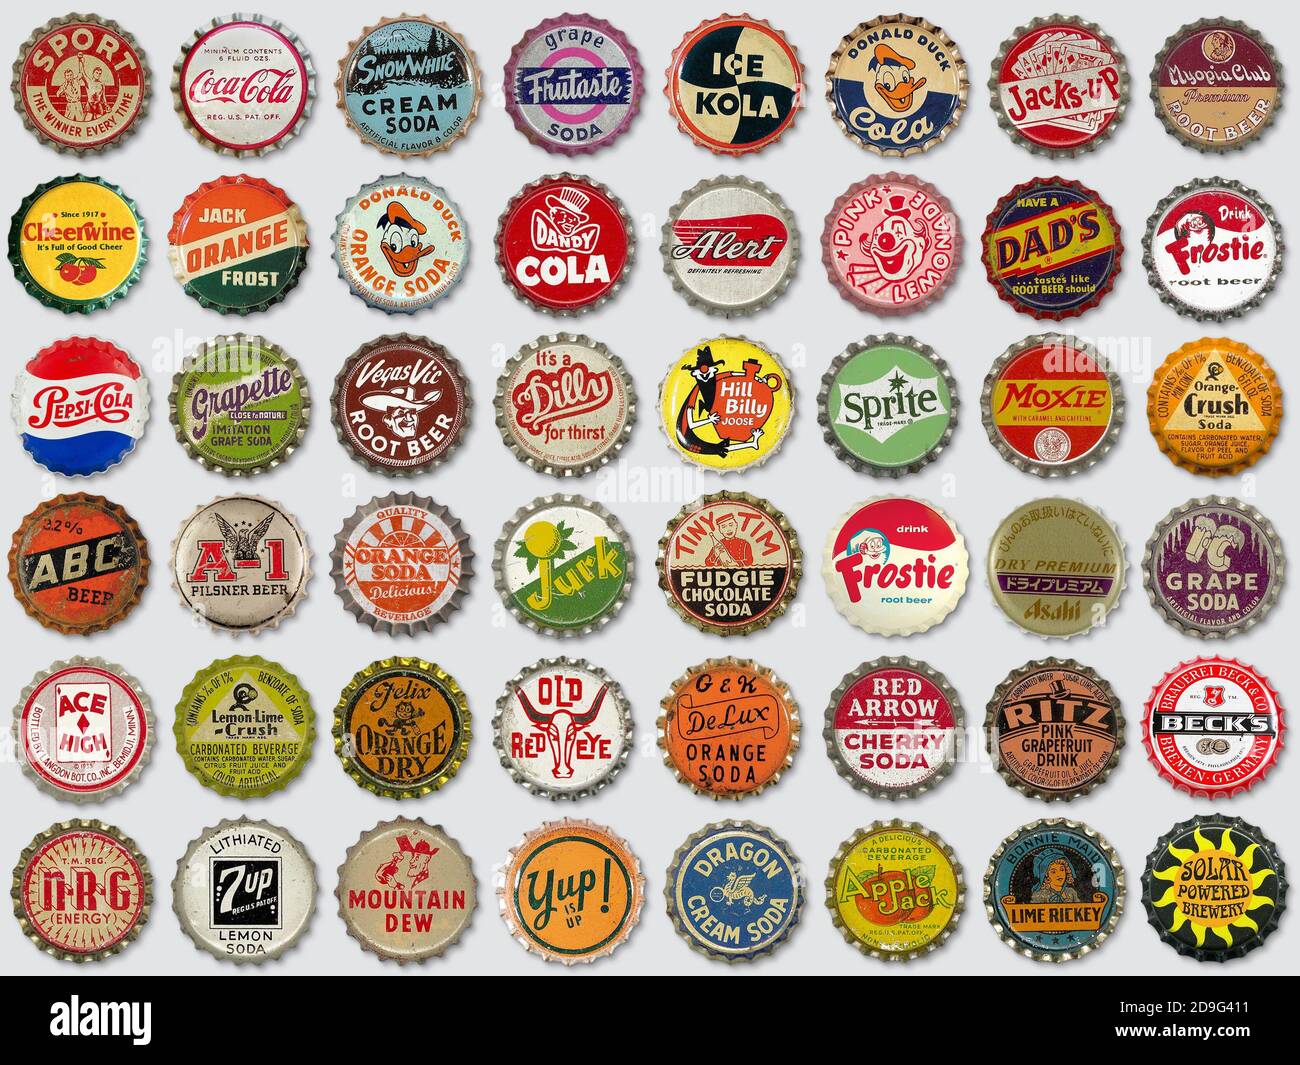 Vintage soda pop bottle caps COCA COLA Collection of 11 different new old stock 